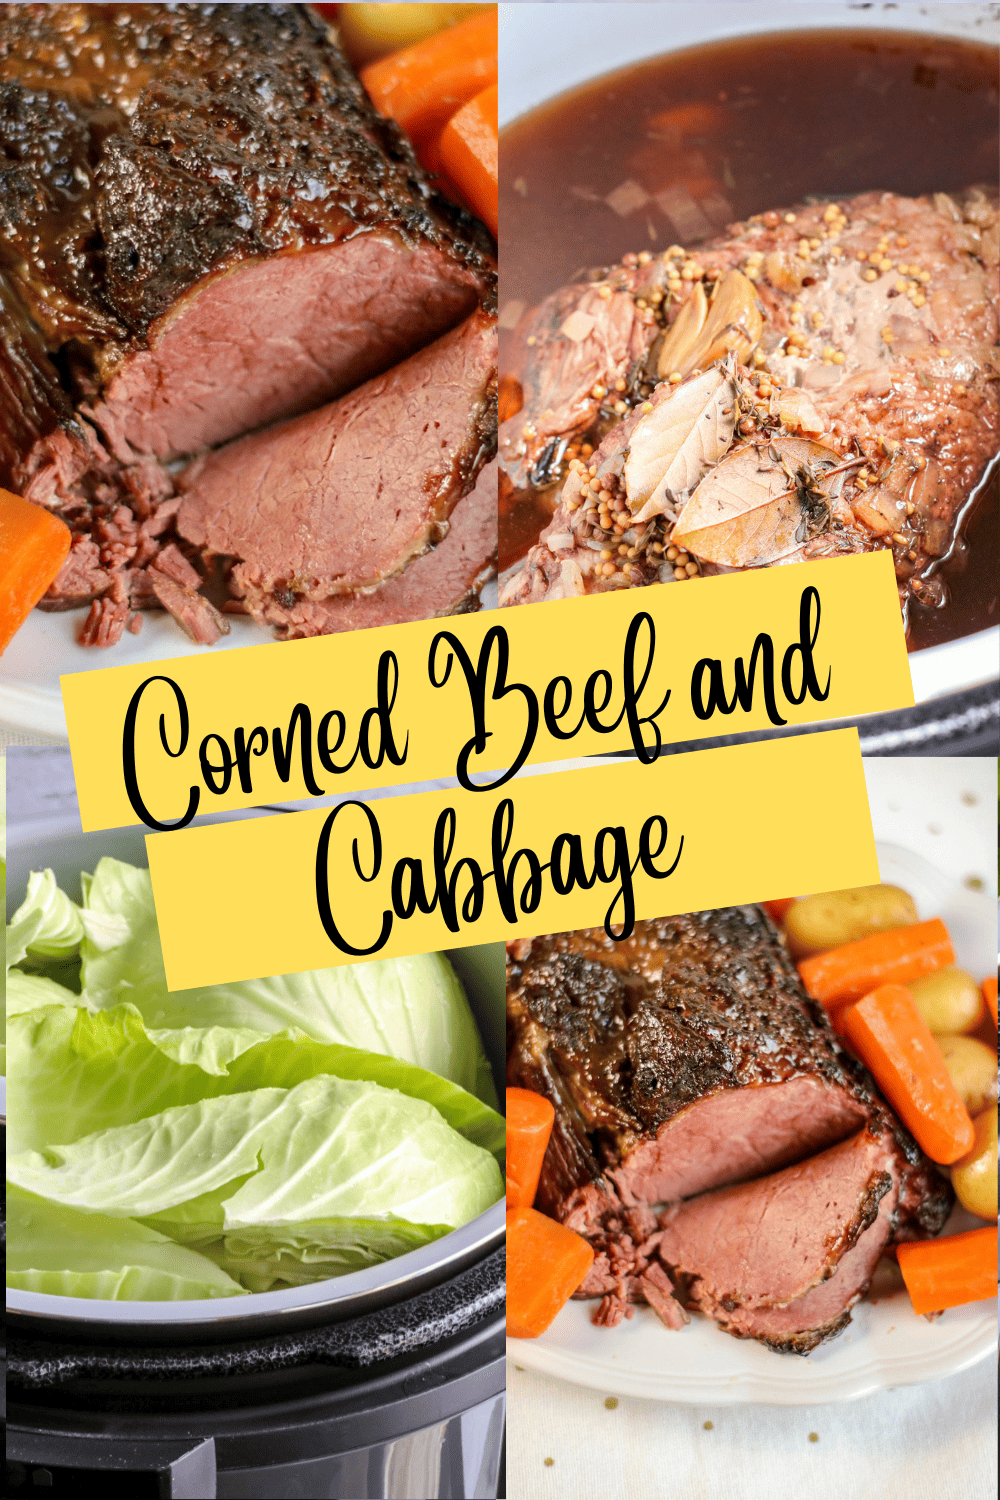 This comfort-food meal of corned beef and cabbage cooks to delicious juicy tenderness with the help of a pressure cooker. My Ninja Foodi makes it easy and effortless. When it’s this simple, there’s no need to wait for a special occasion to make it! via @Mooreorlesscook